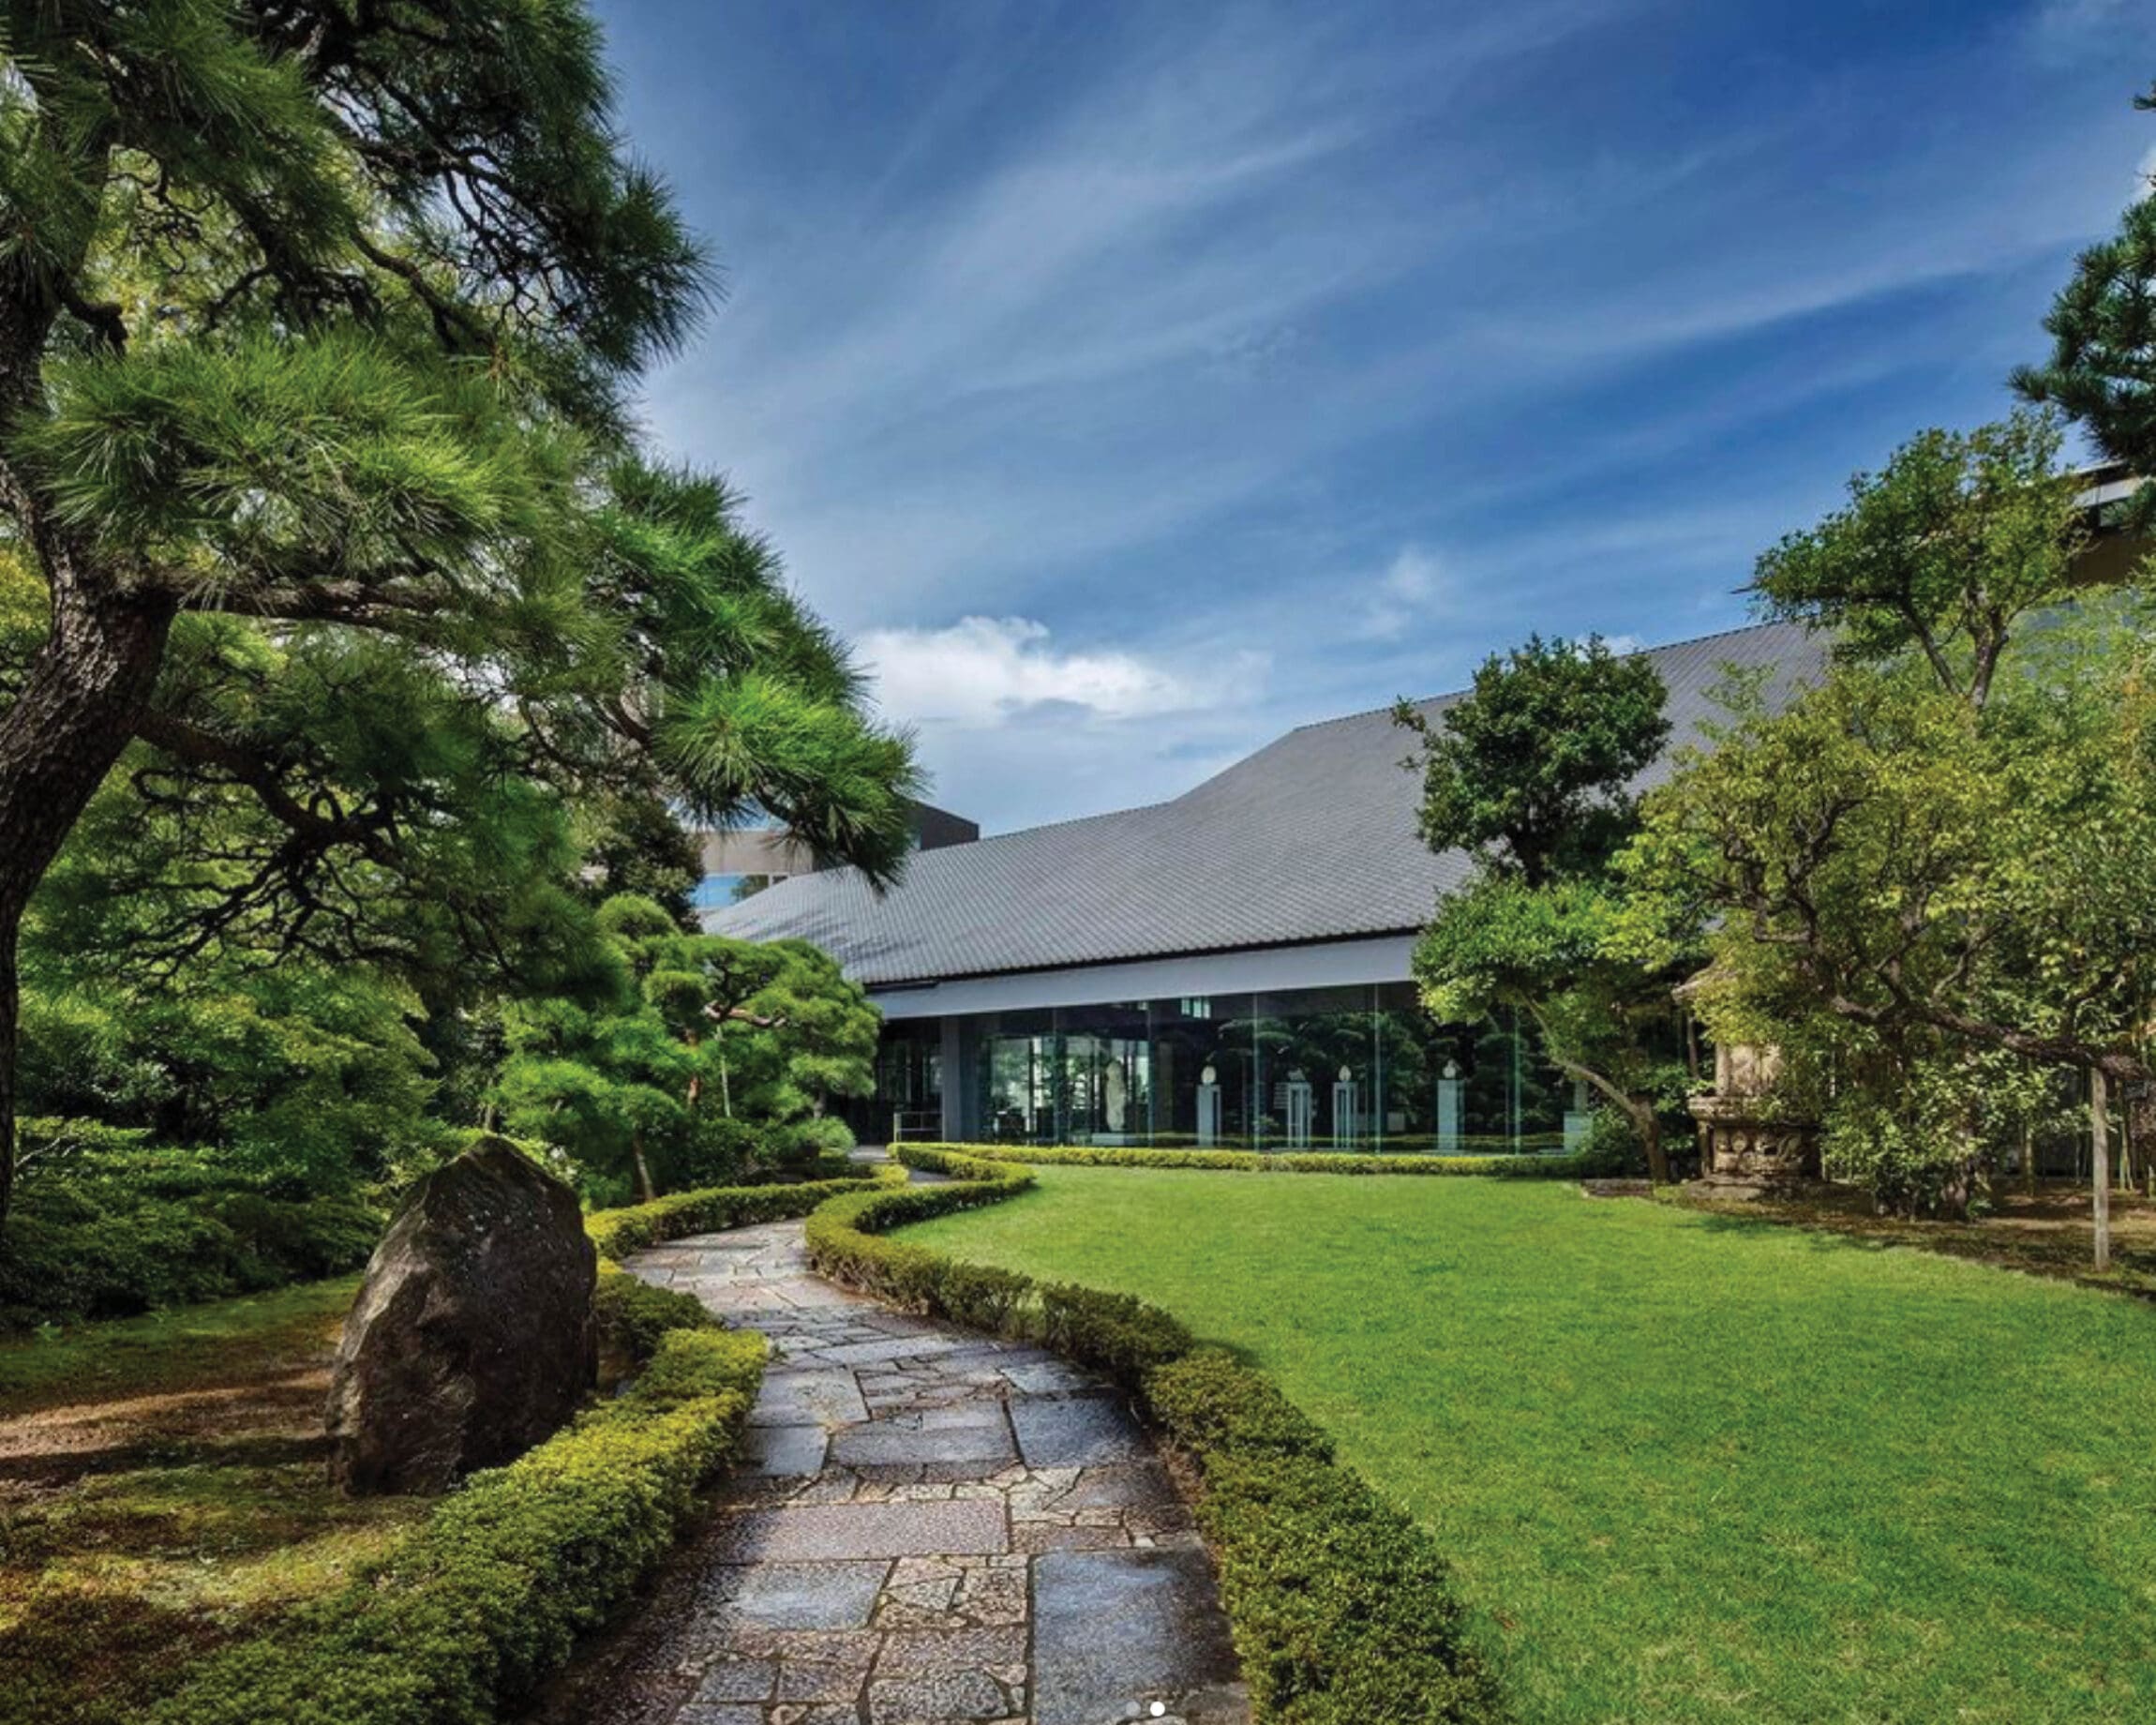 The best museums in Tokyo | the exterior of Nezu Museum in a peaceful garden